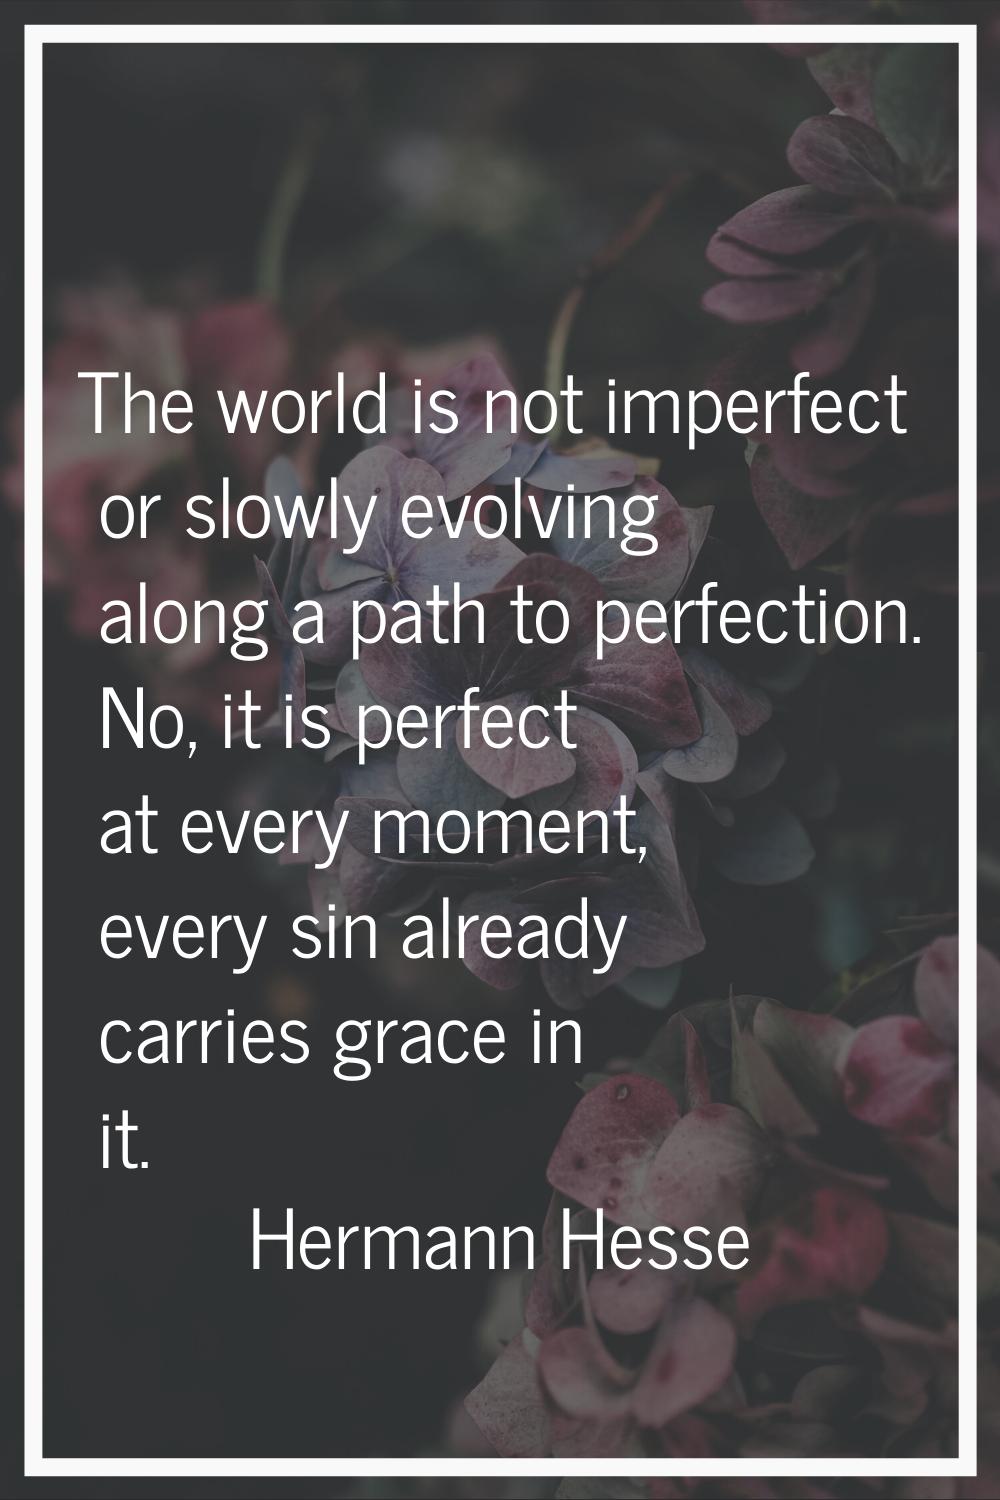 The world is not imperfect or slowly evolving along a path to perfection. No, it is perfect at ever